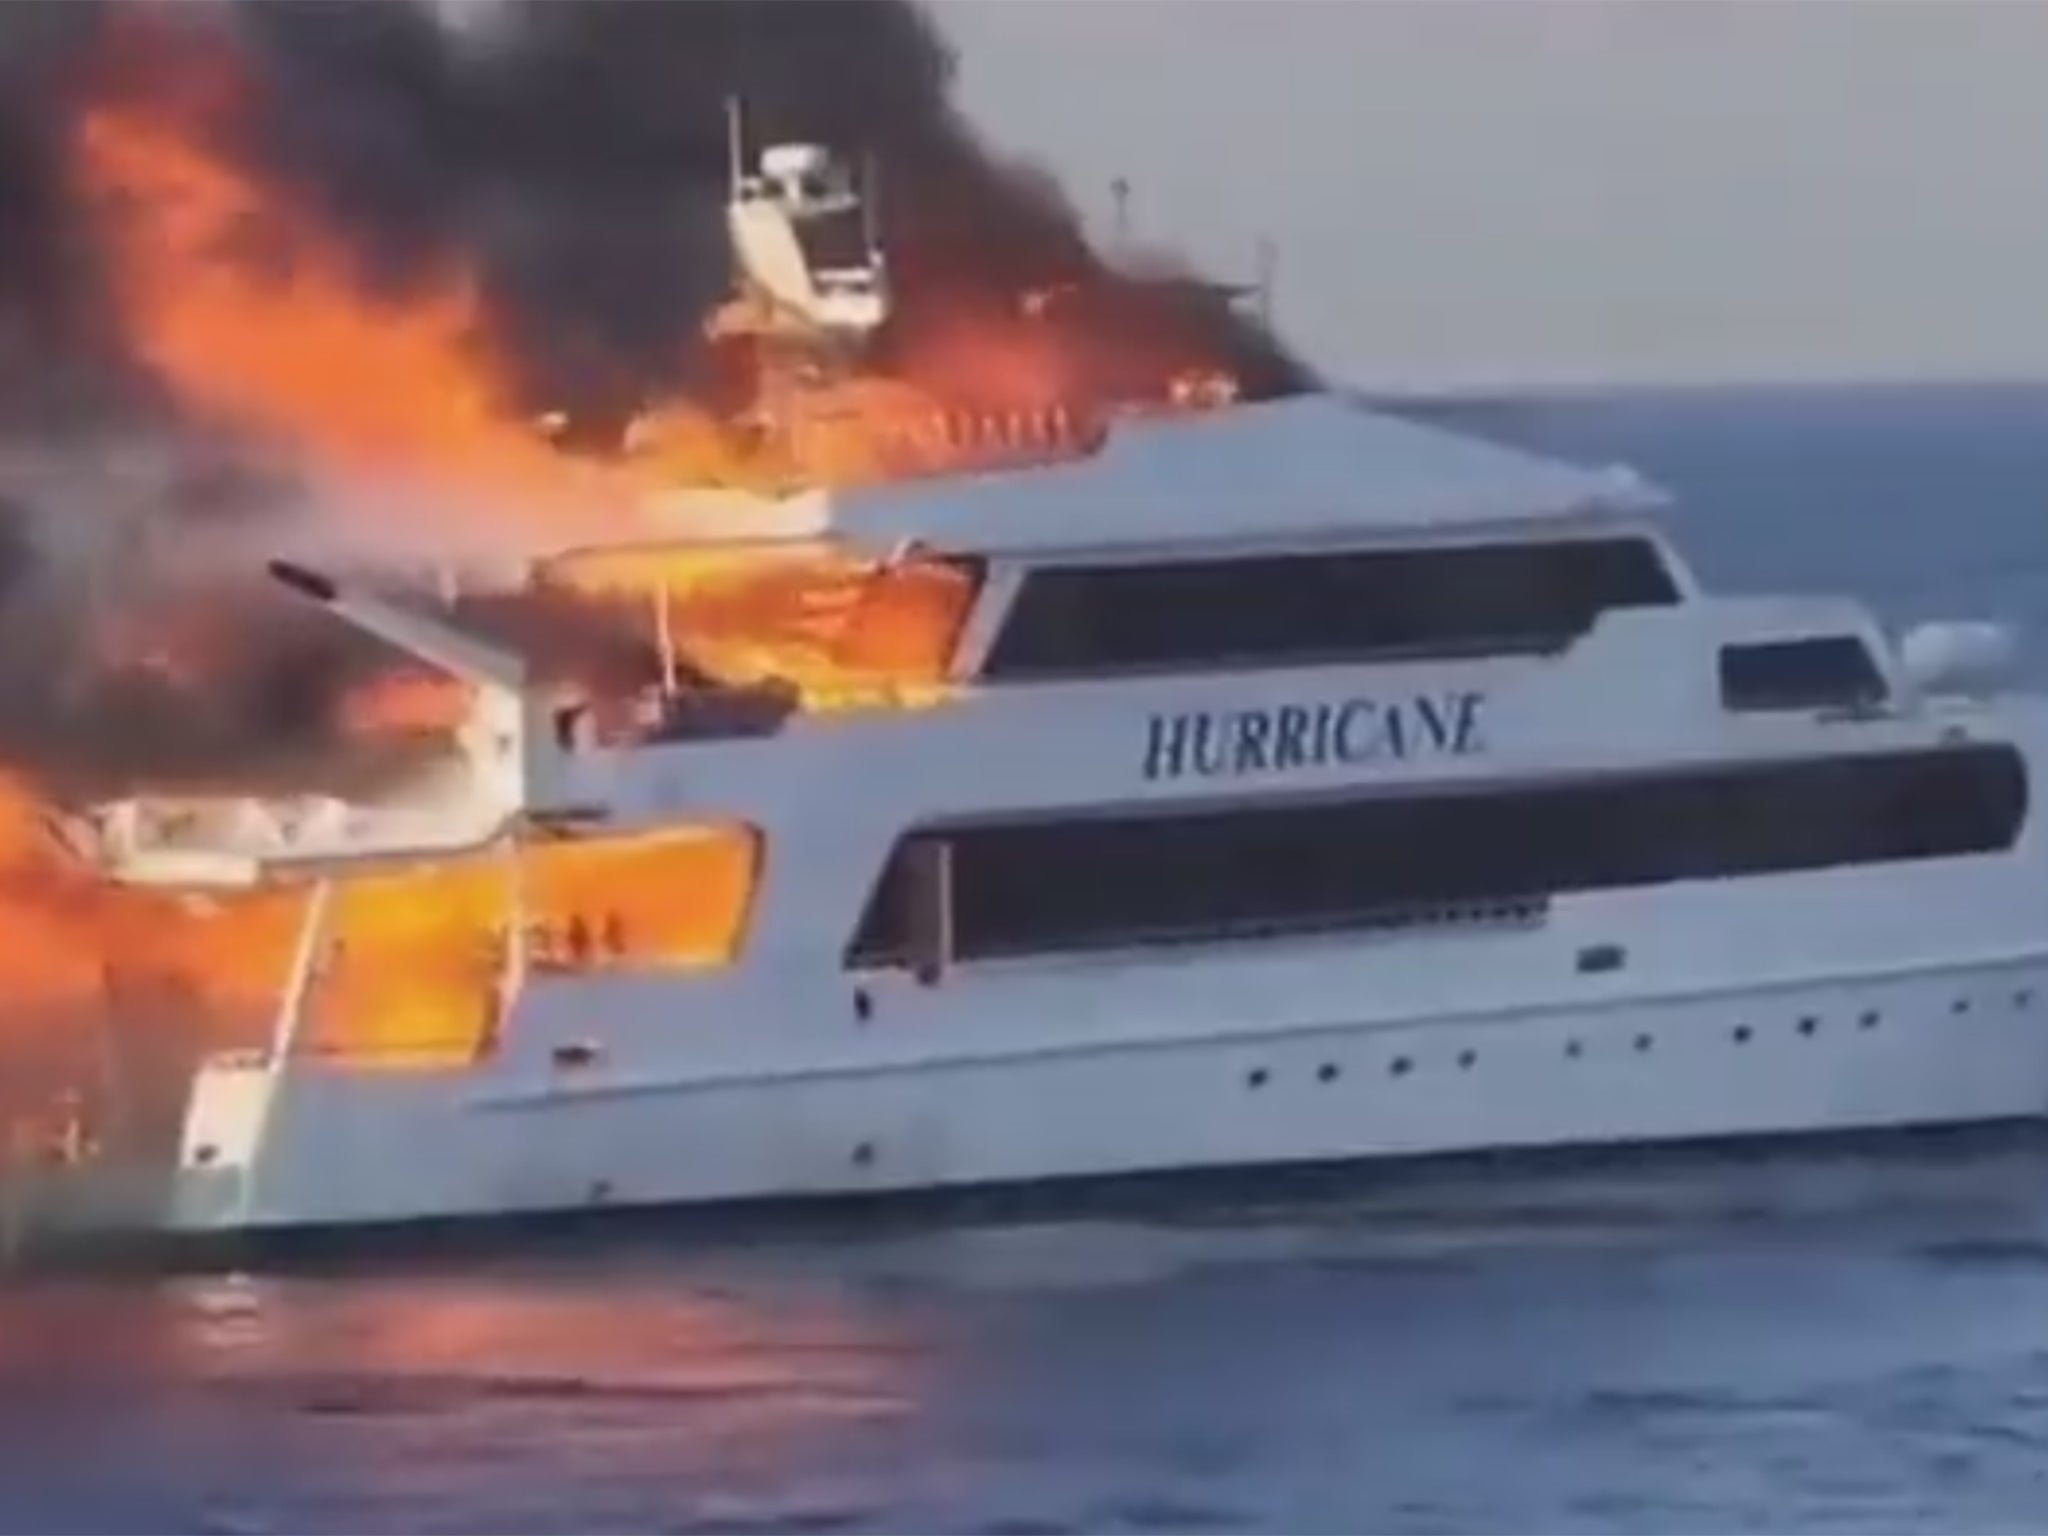 The three Britons were below deck when the fire broke out